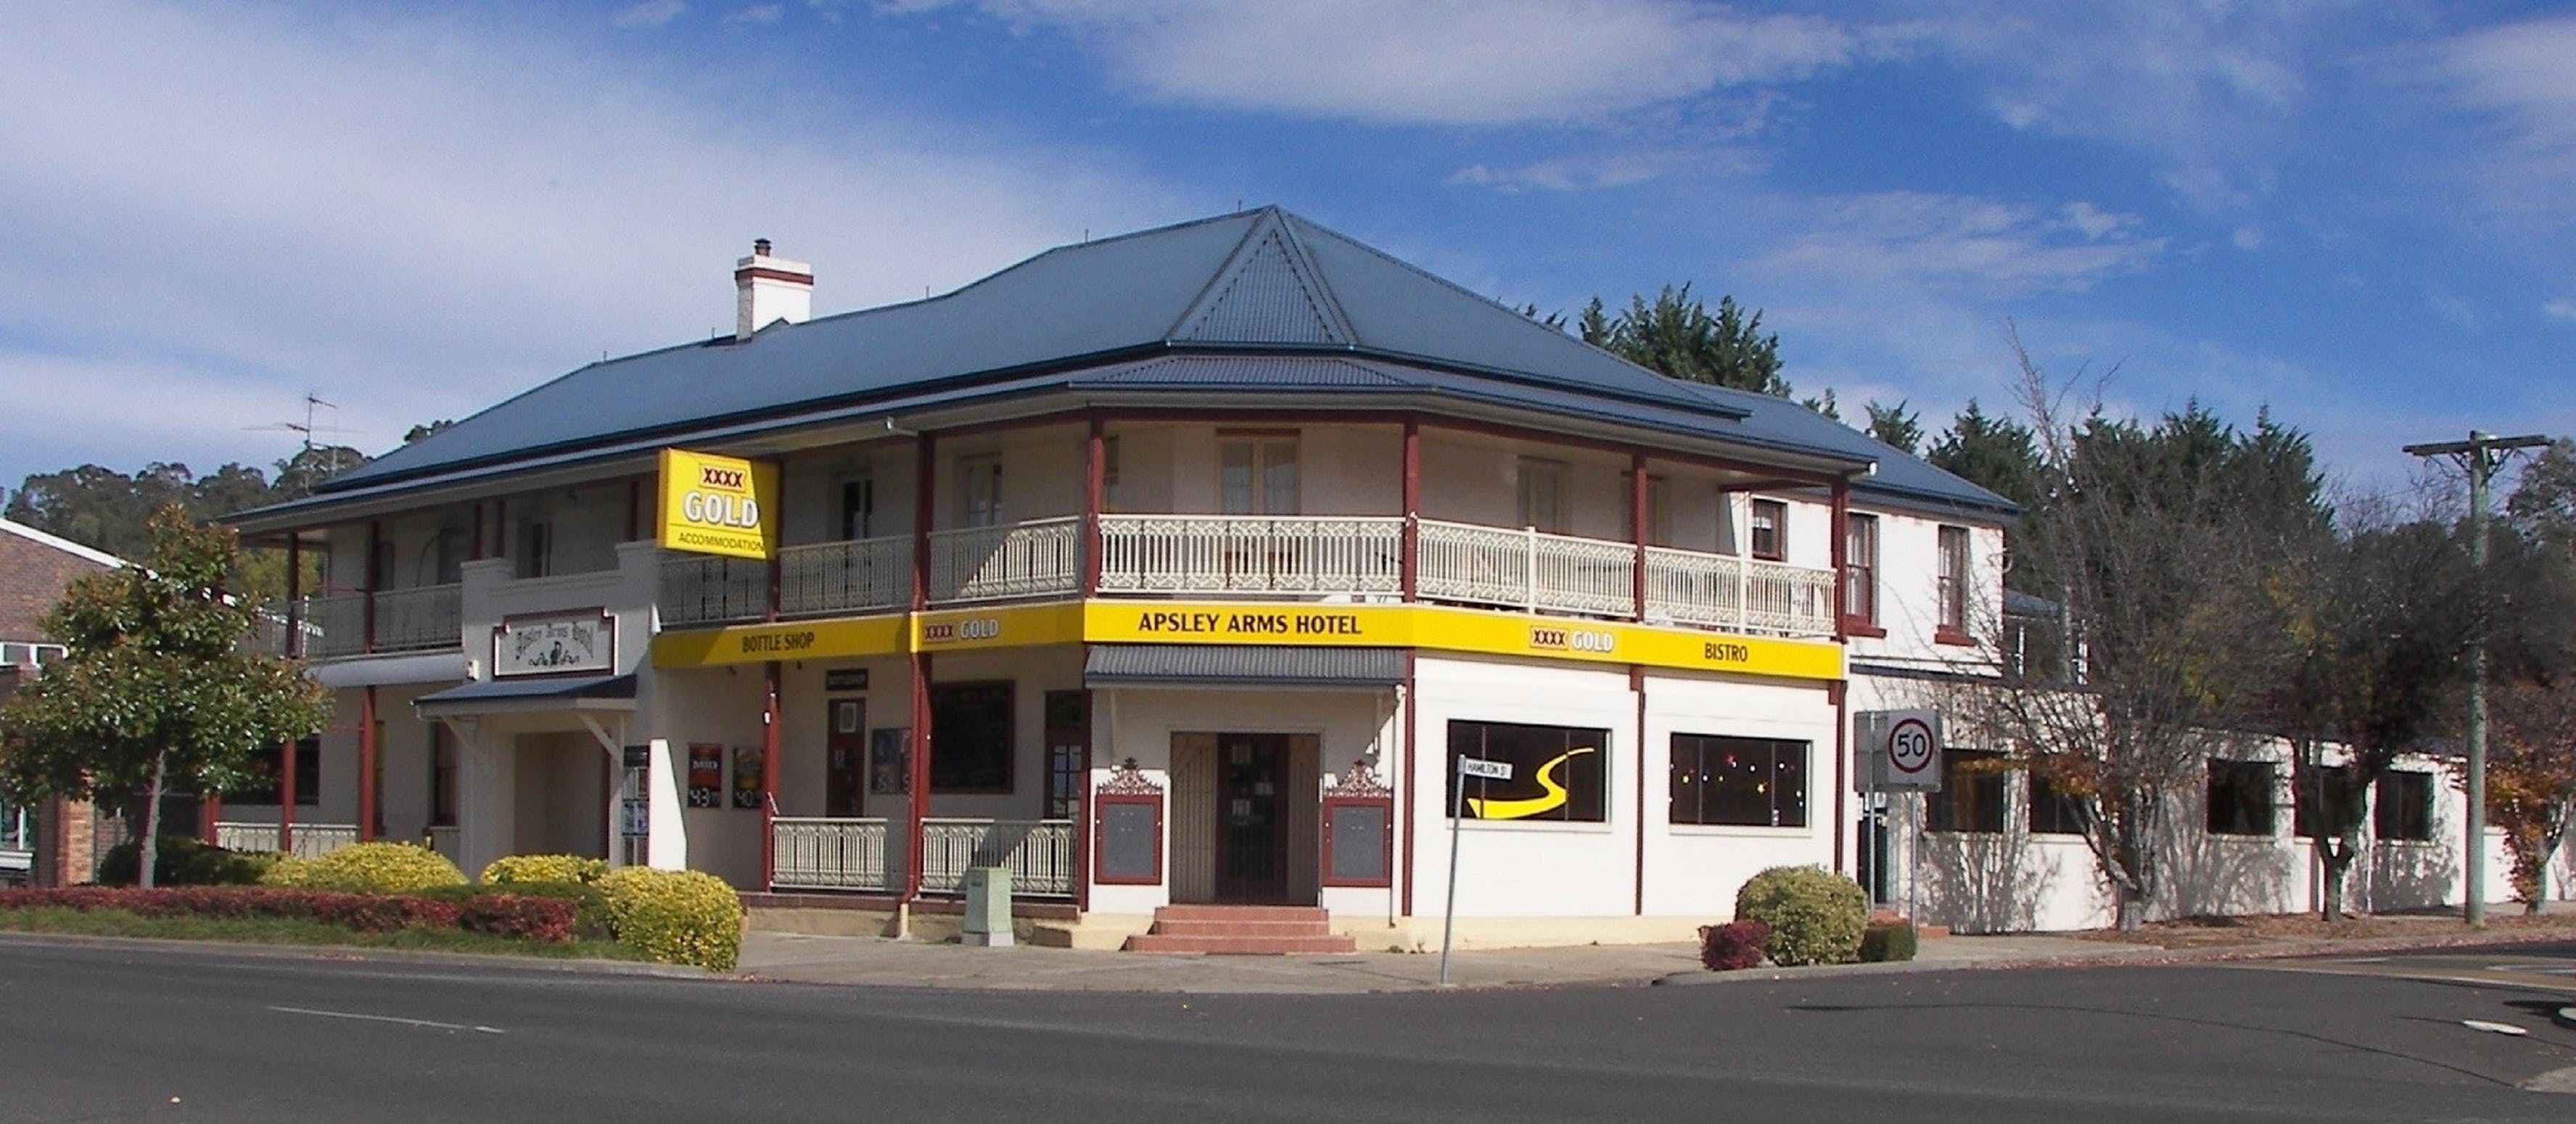 Apsley Arms Hotel - Coogee Beach Accommodation